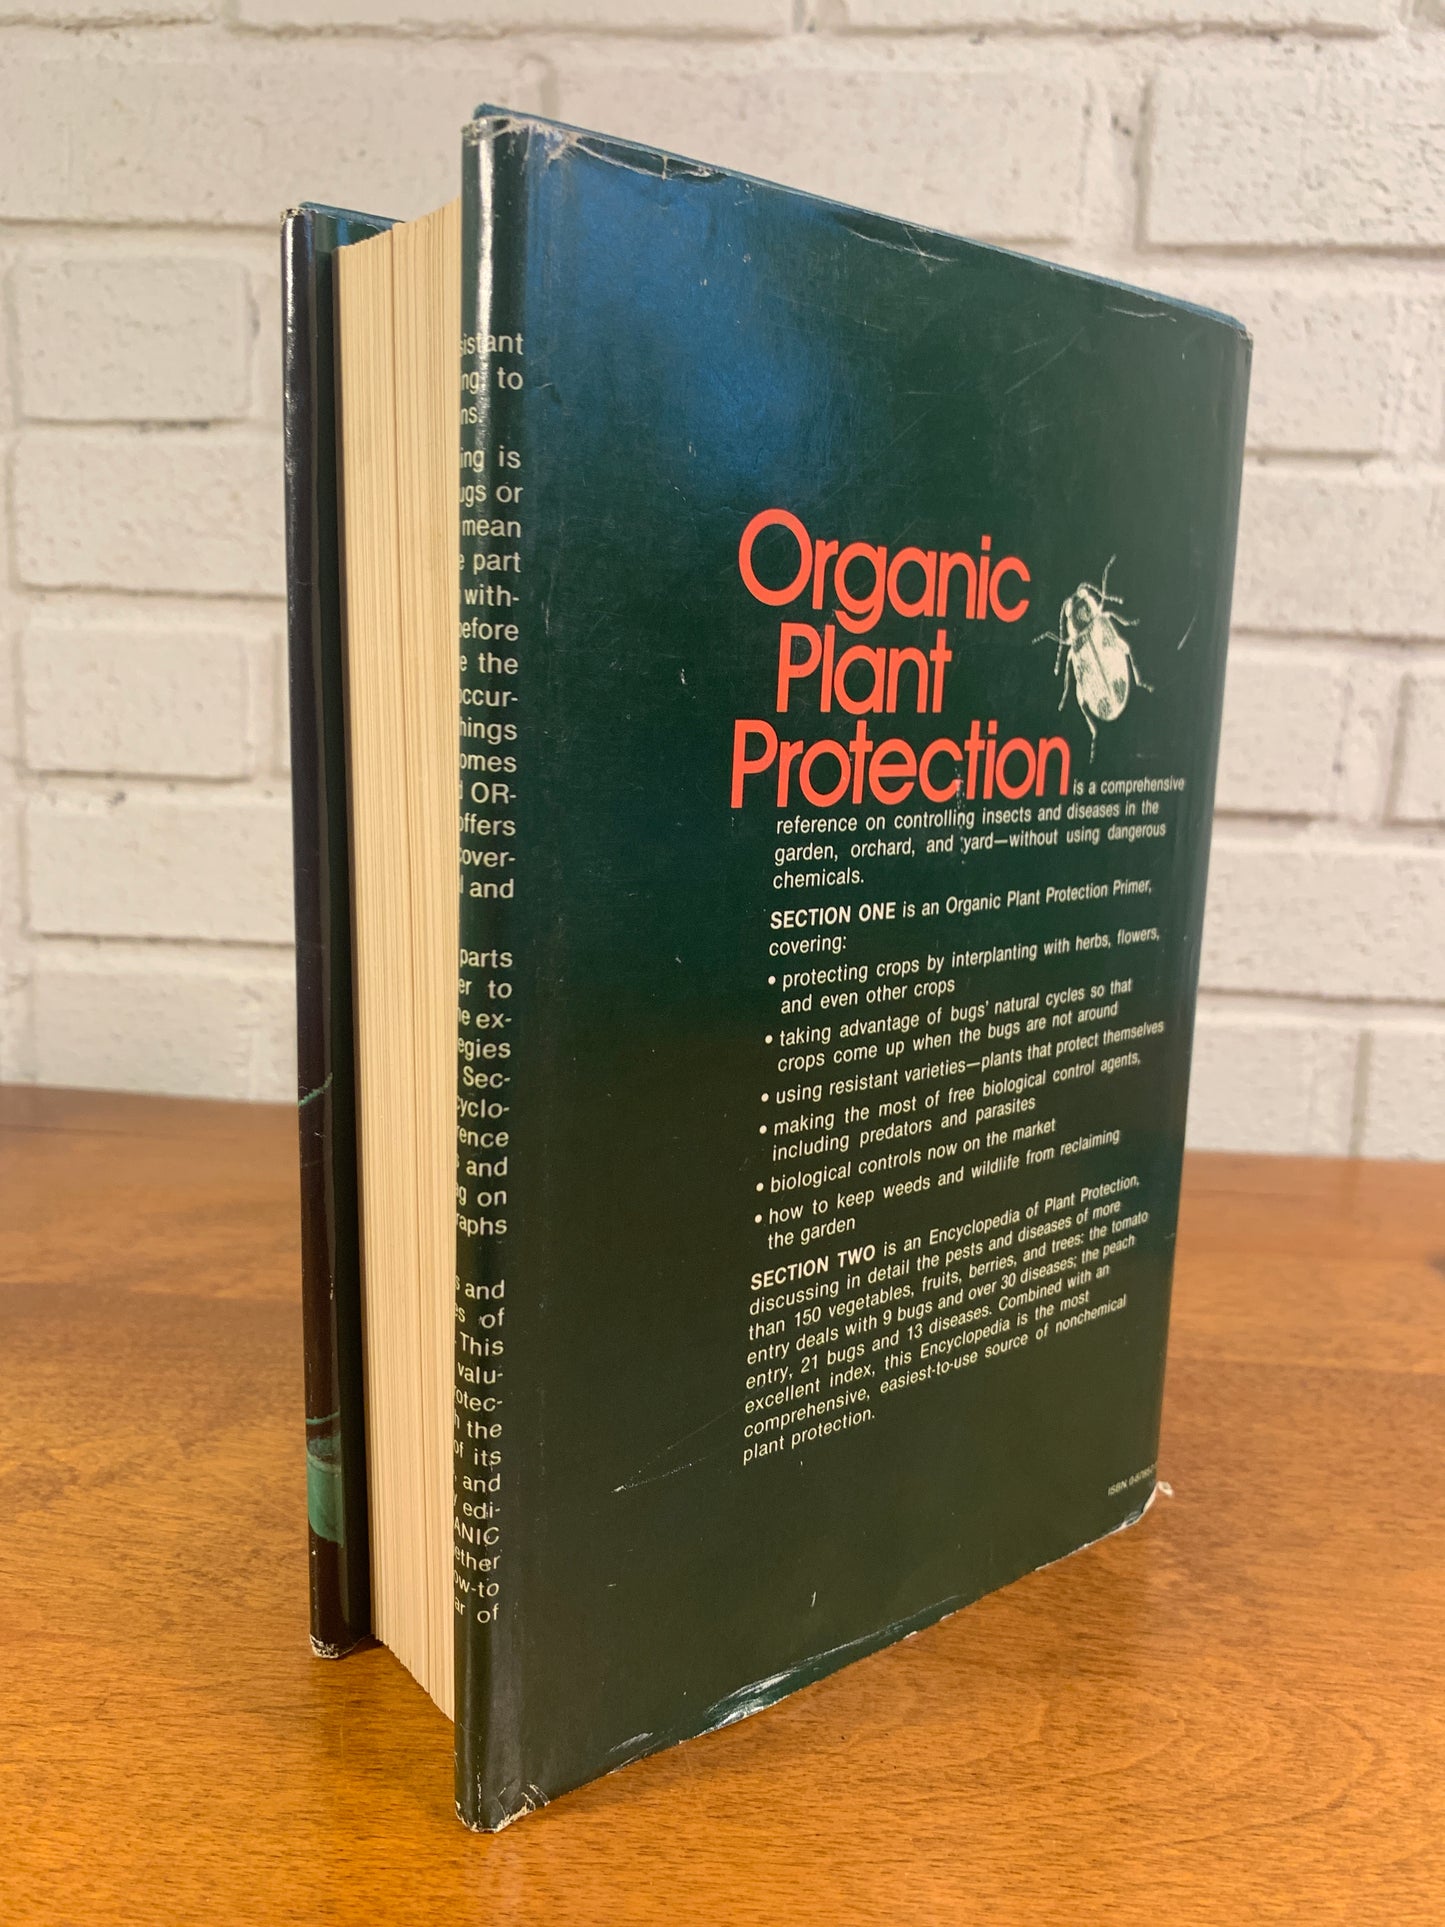 Organic Plant Protection: Reference on Controlling Insects & Diseases in the Garden